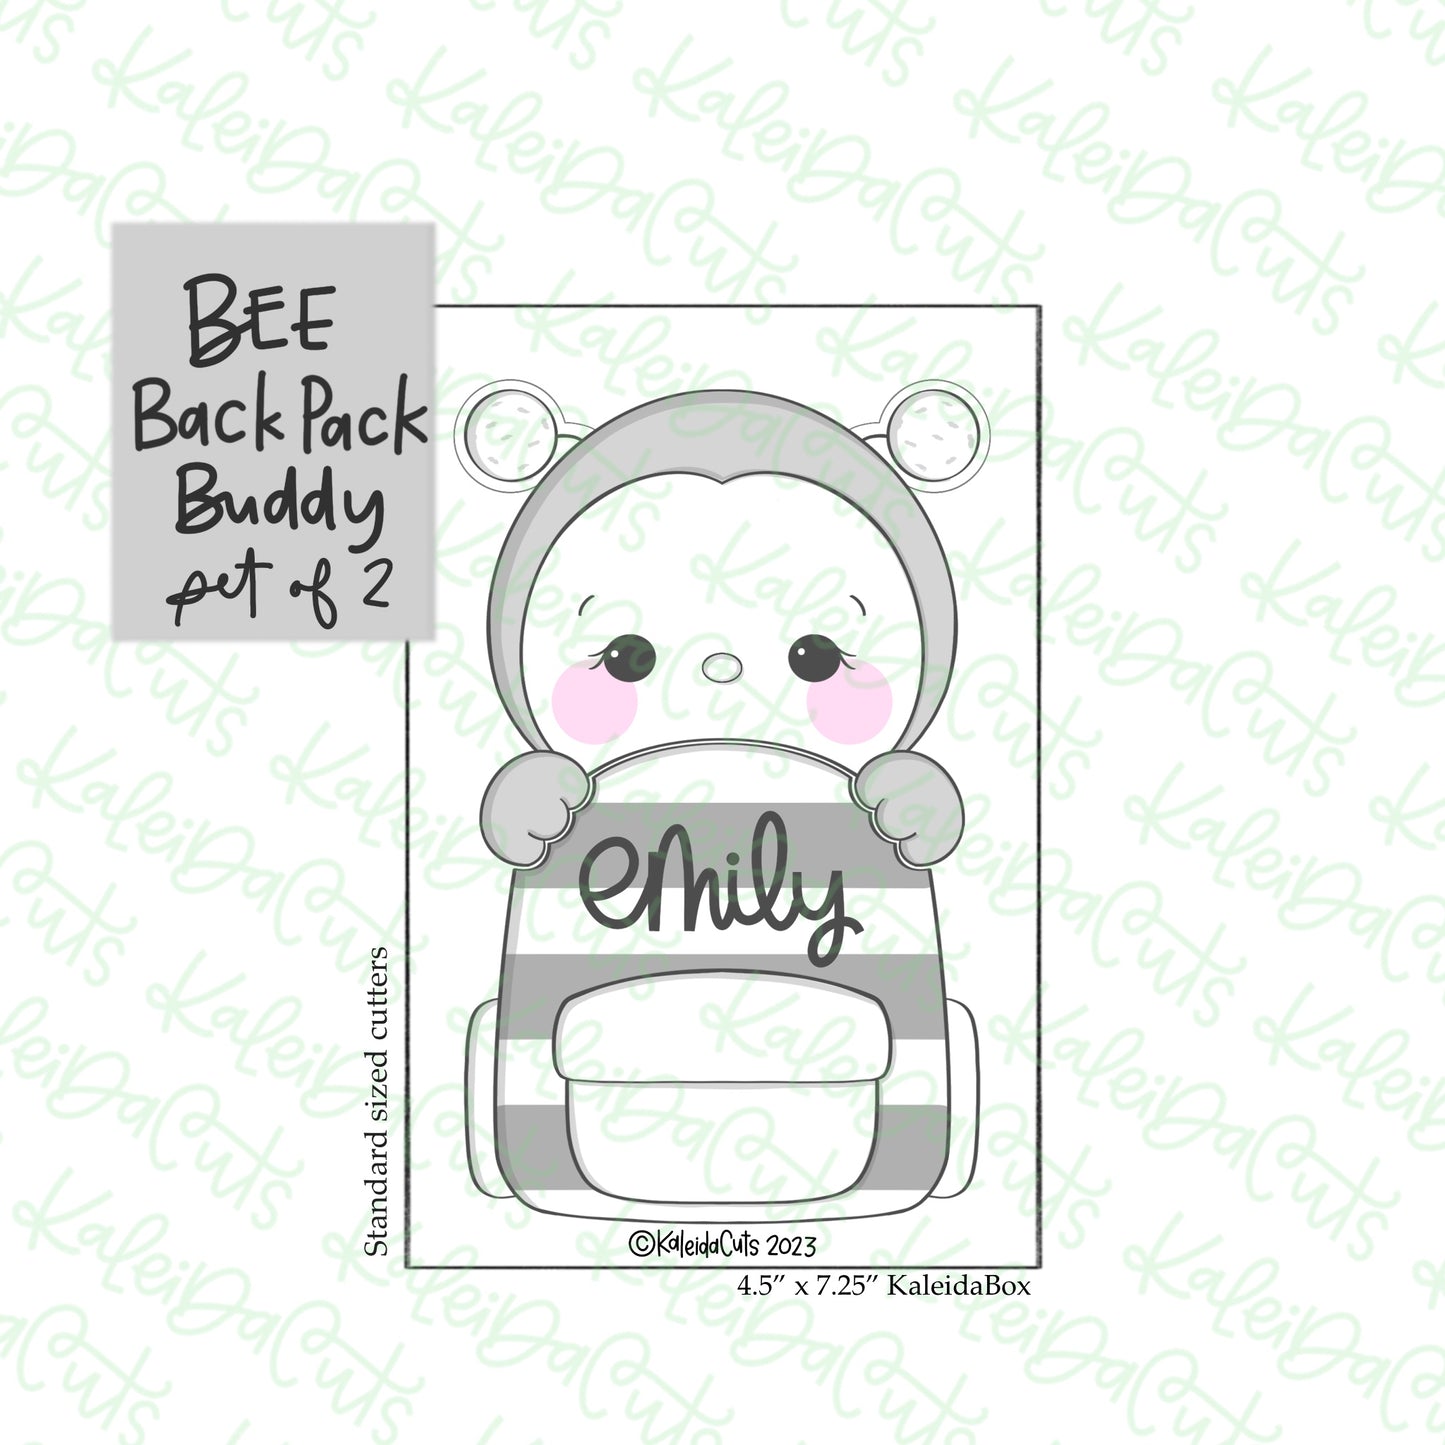 BackPack Buddy Bee Cookie Cutter Set of 2